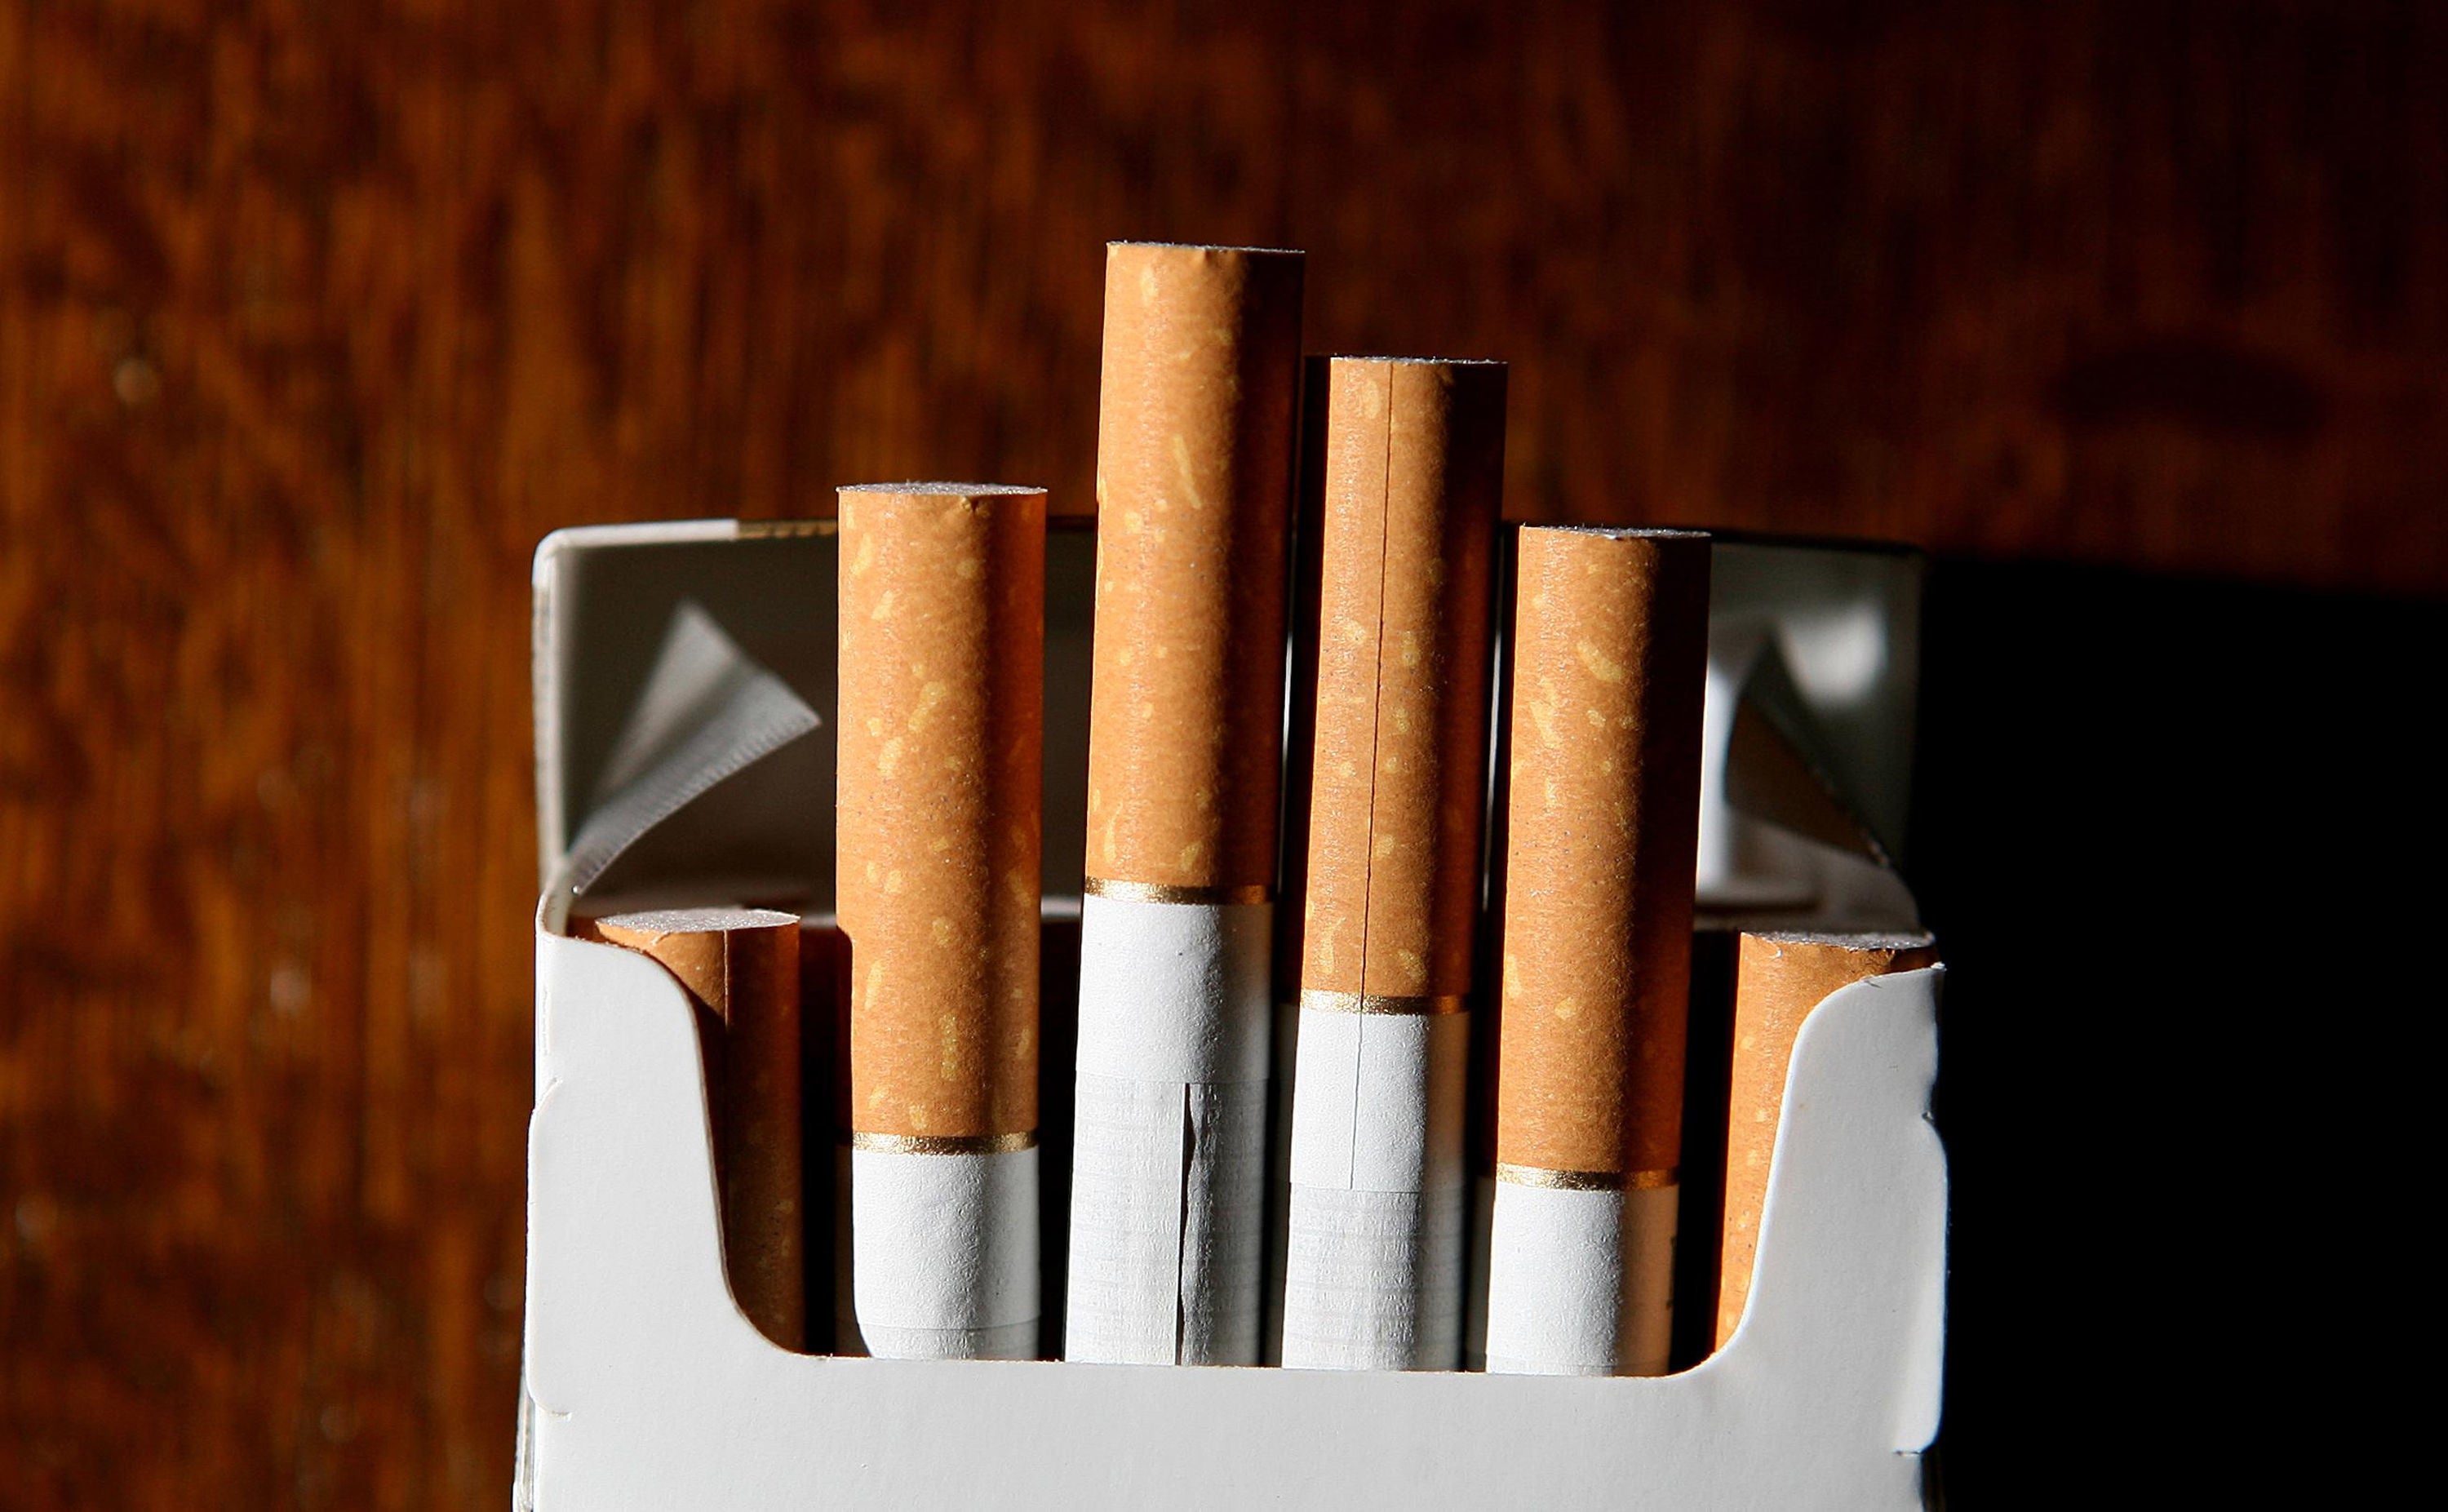 A maximum price cap on cigarettes in the UK could help cut smoking rates , it’s claimed